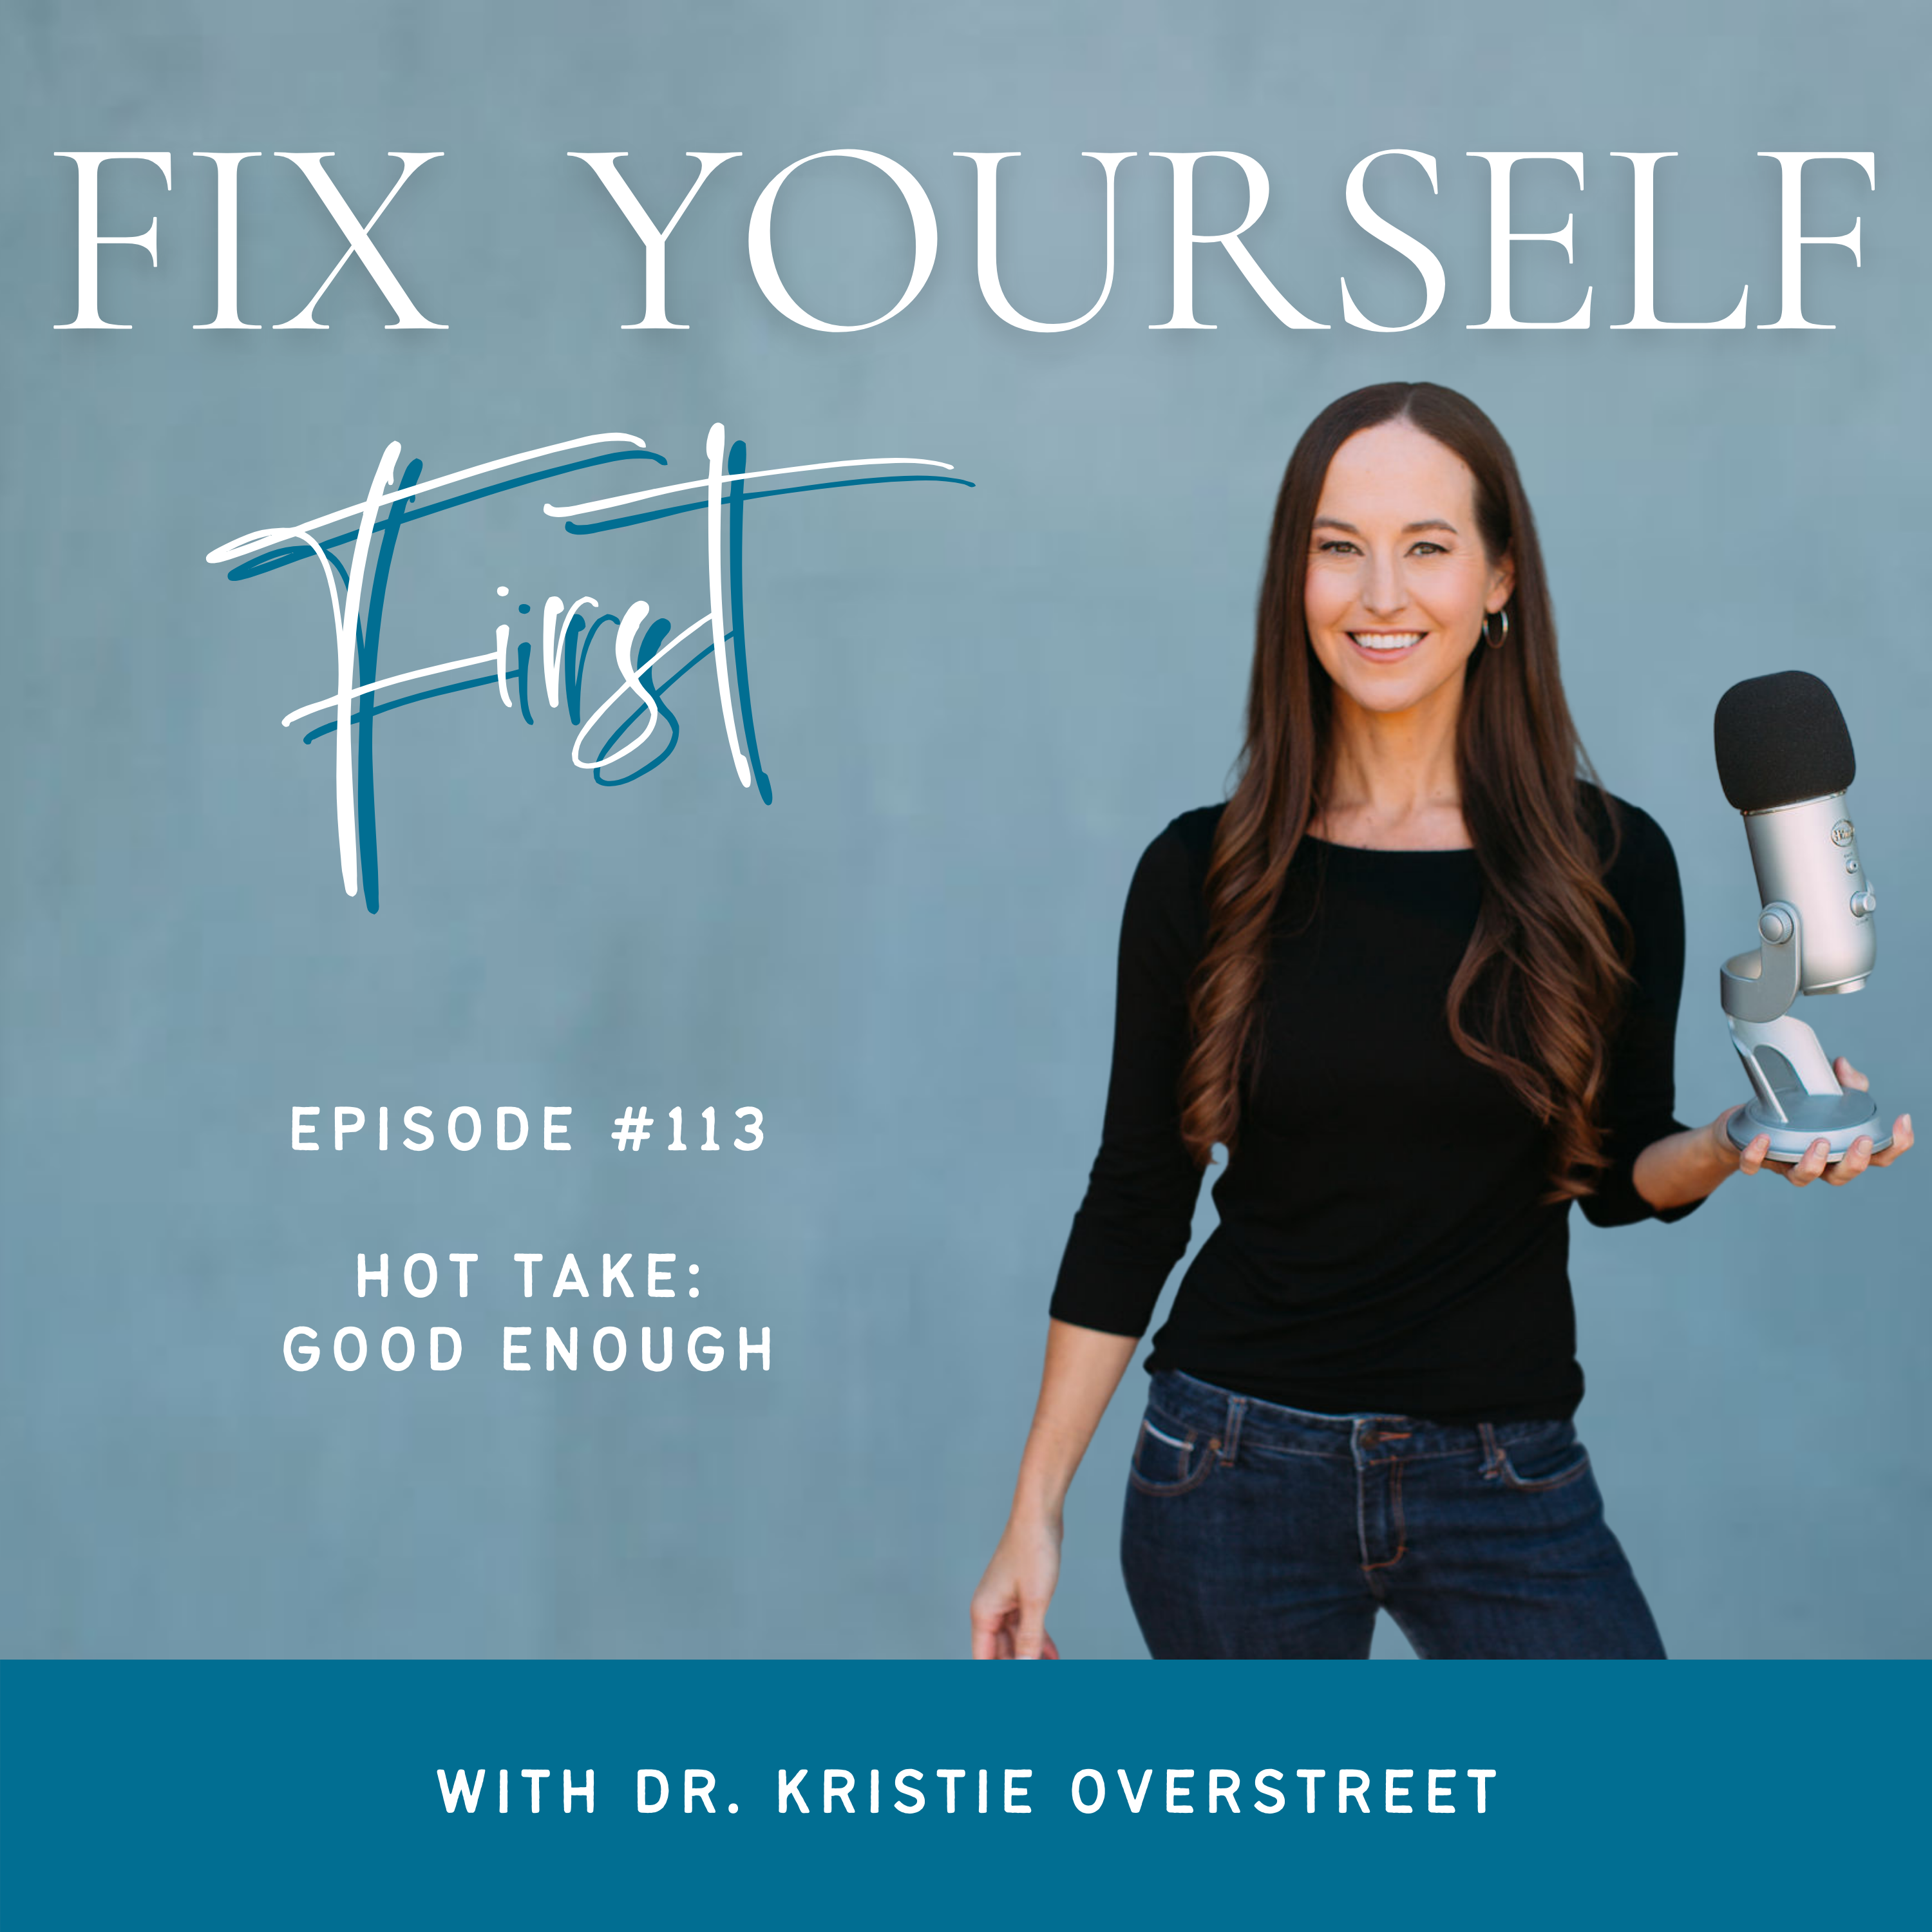 Fix Yourself First Episode 113 Hot Take: Good Enough